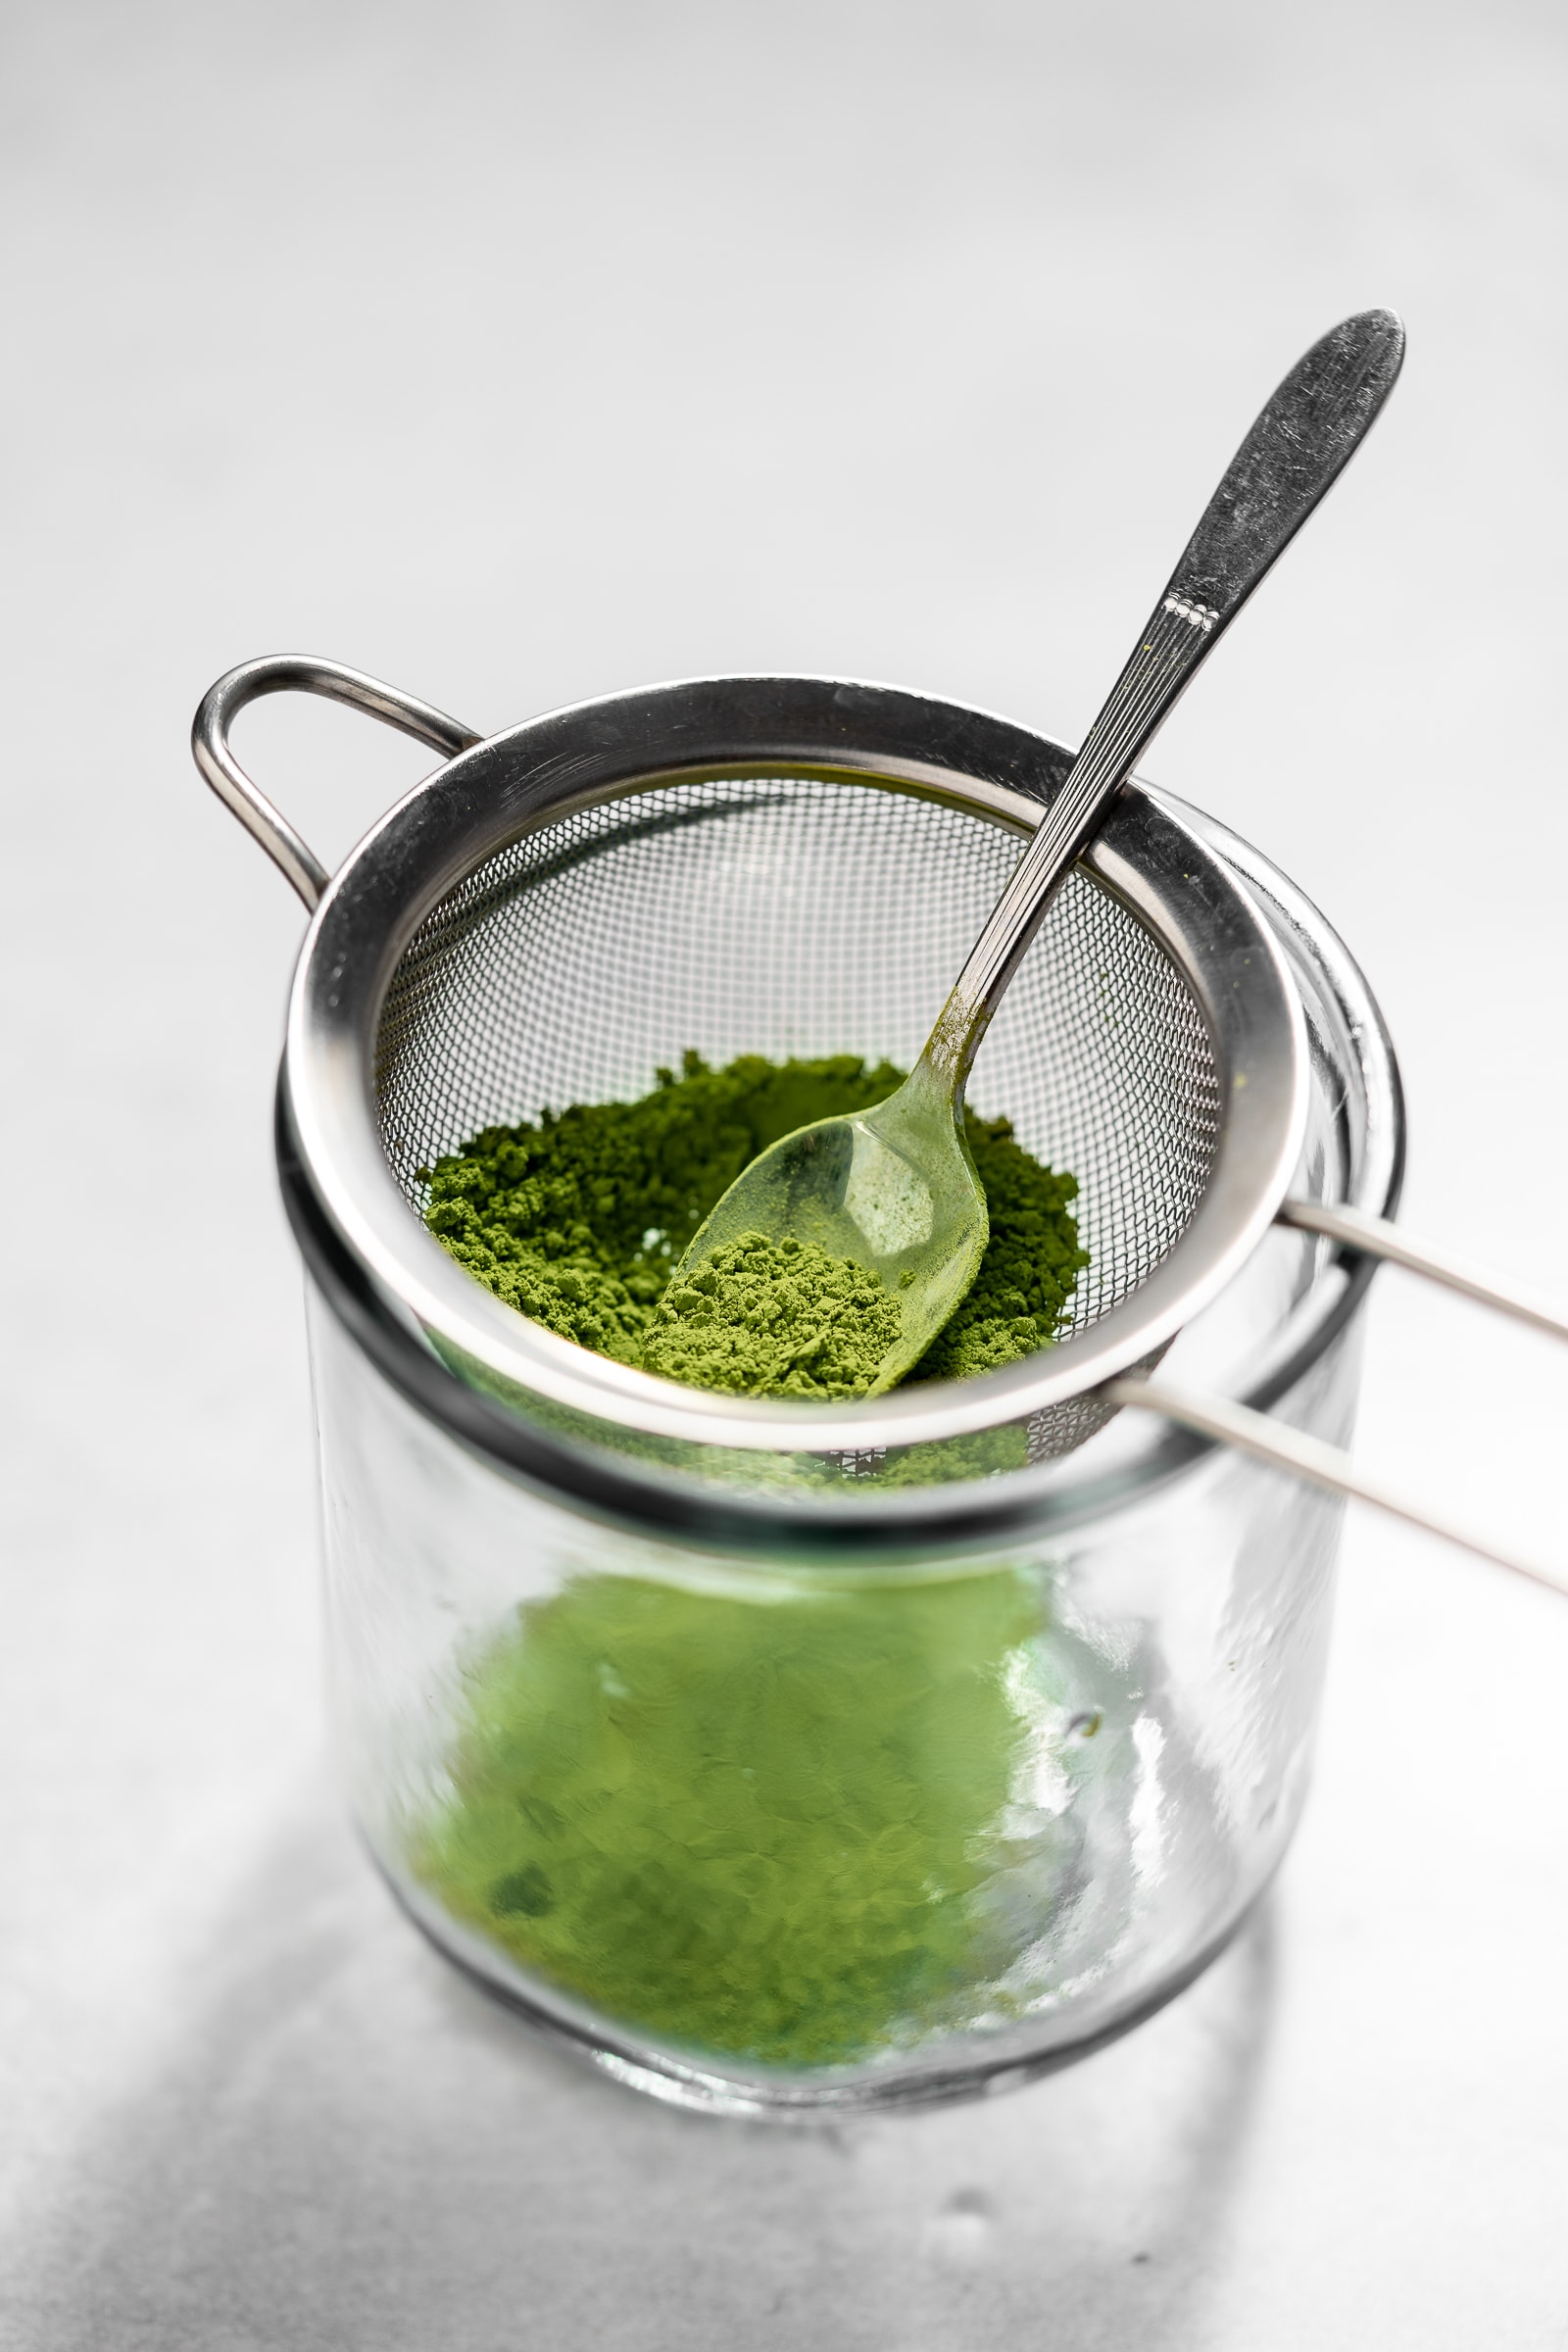 Matcha being shifted through a mesh strainer.